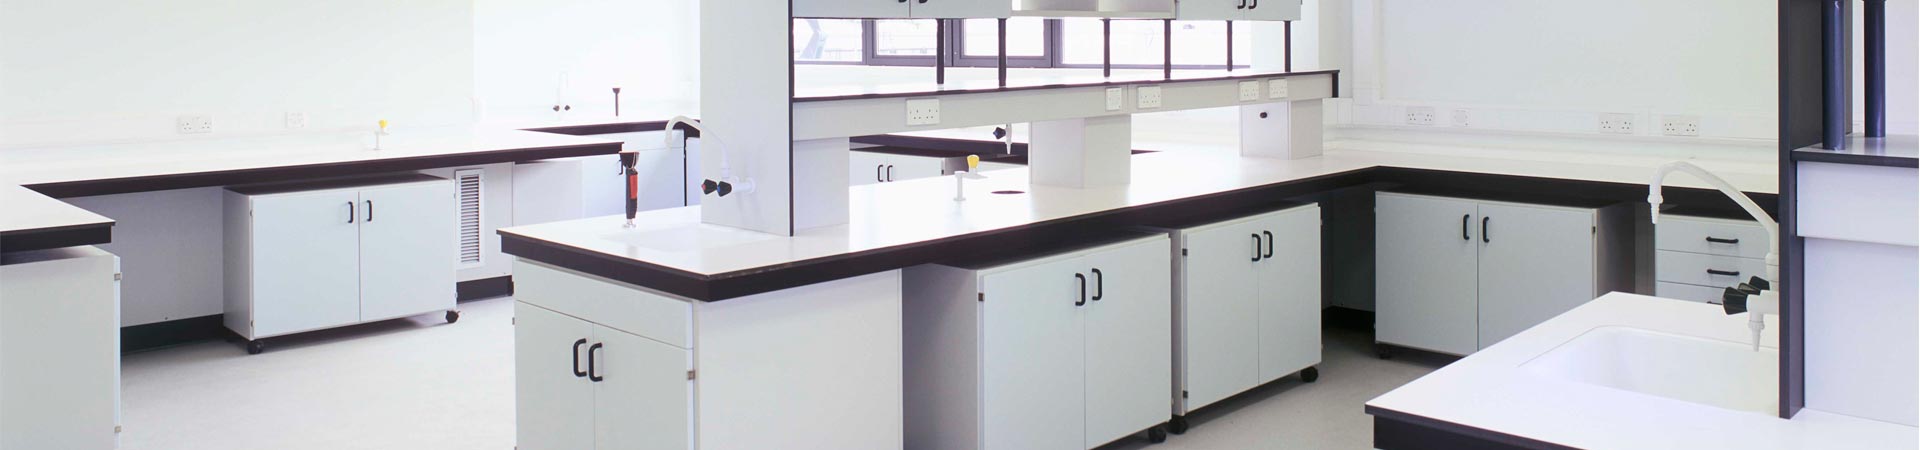 Photo showing an empty laboratory that could be rented